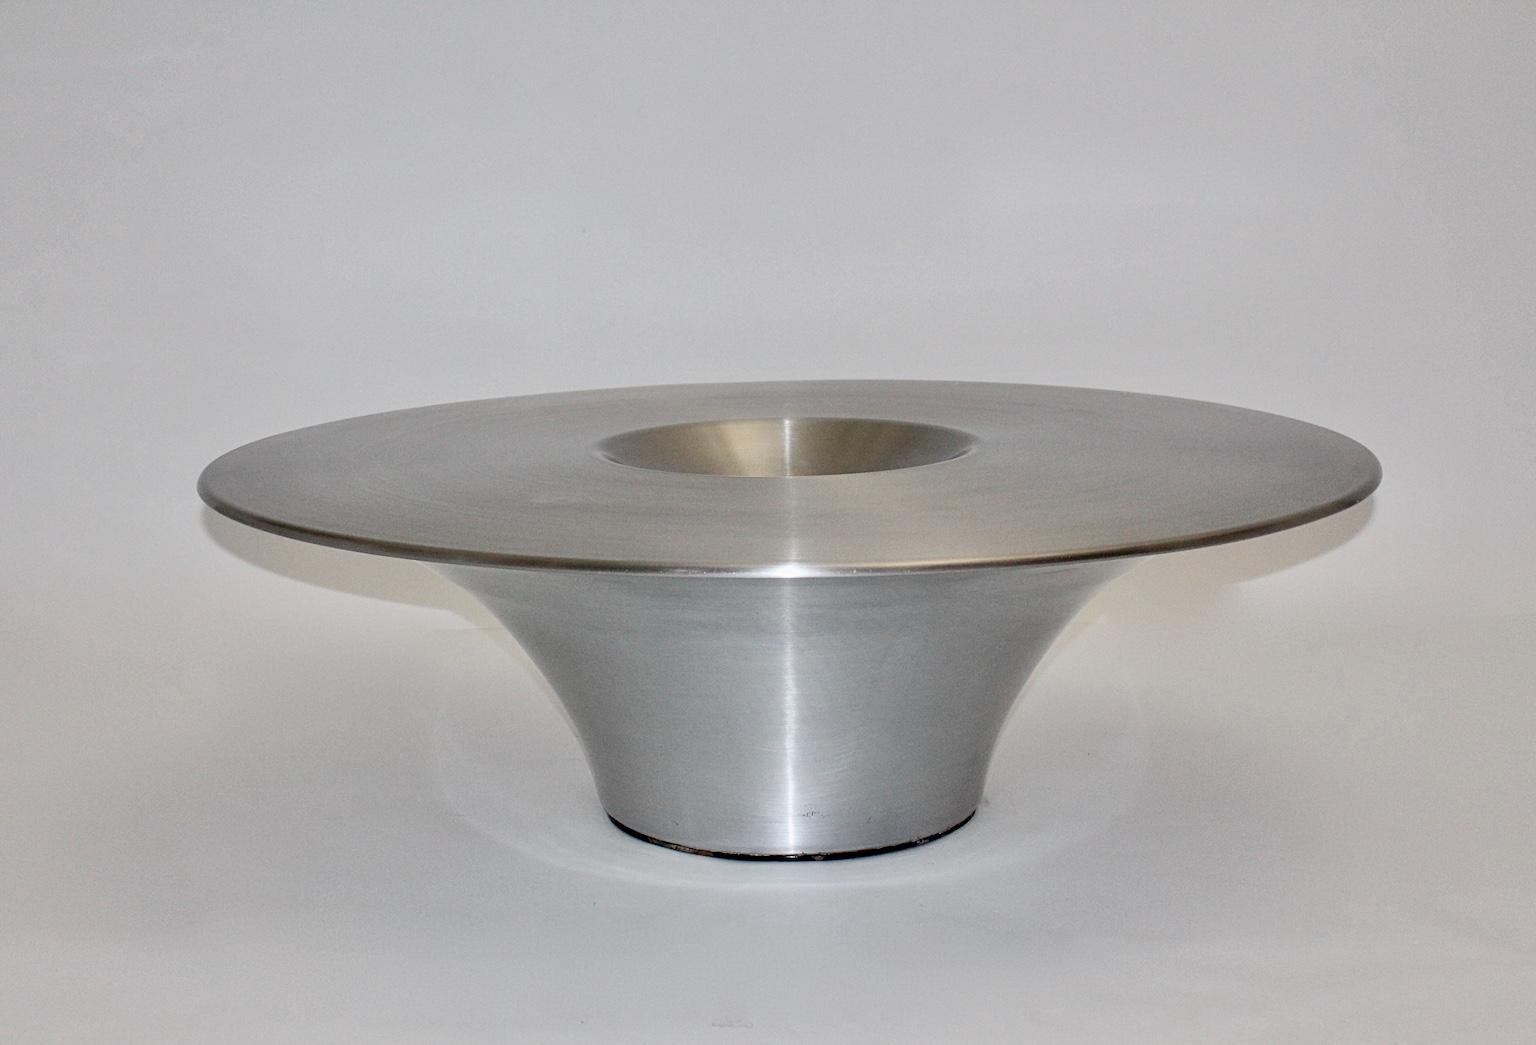 A modern vintage aluminum stainless steel coffee table, which was designed by Yasuhiro Shito 2002 for Cattelan, Italy.
While this coffee table Alien presents premium design features, it appears sophisticated and vibrant.
A bowl-shaped indentation